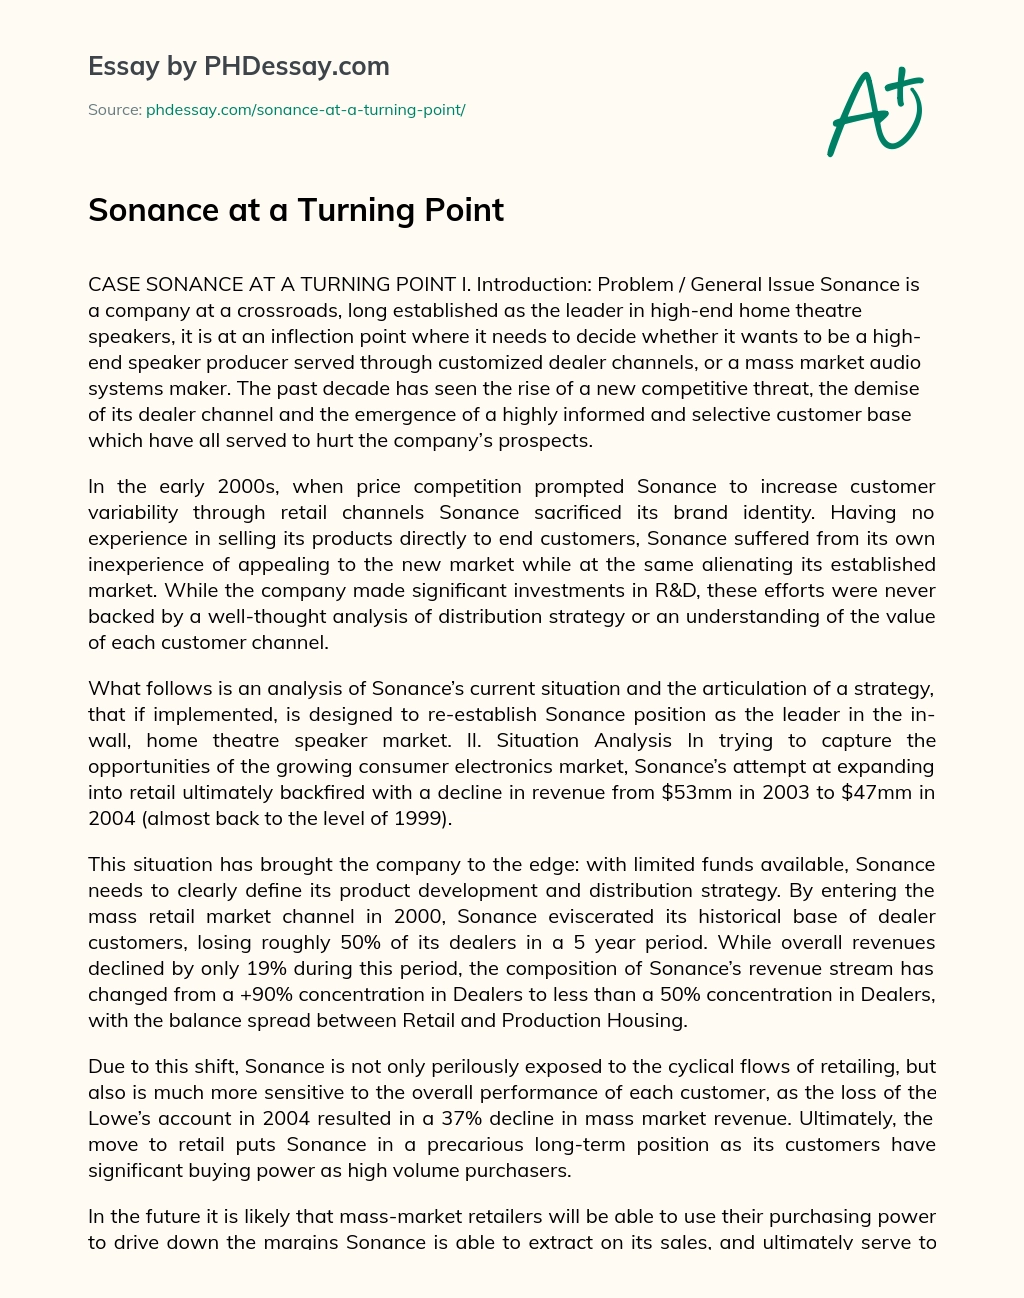 Sonance at a Turning Point essay